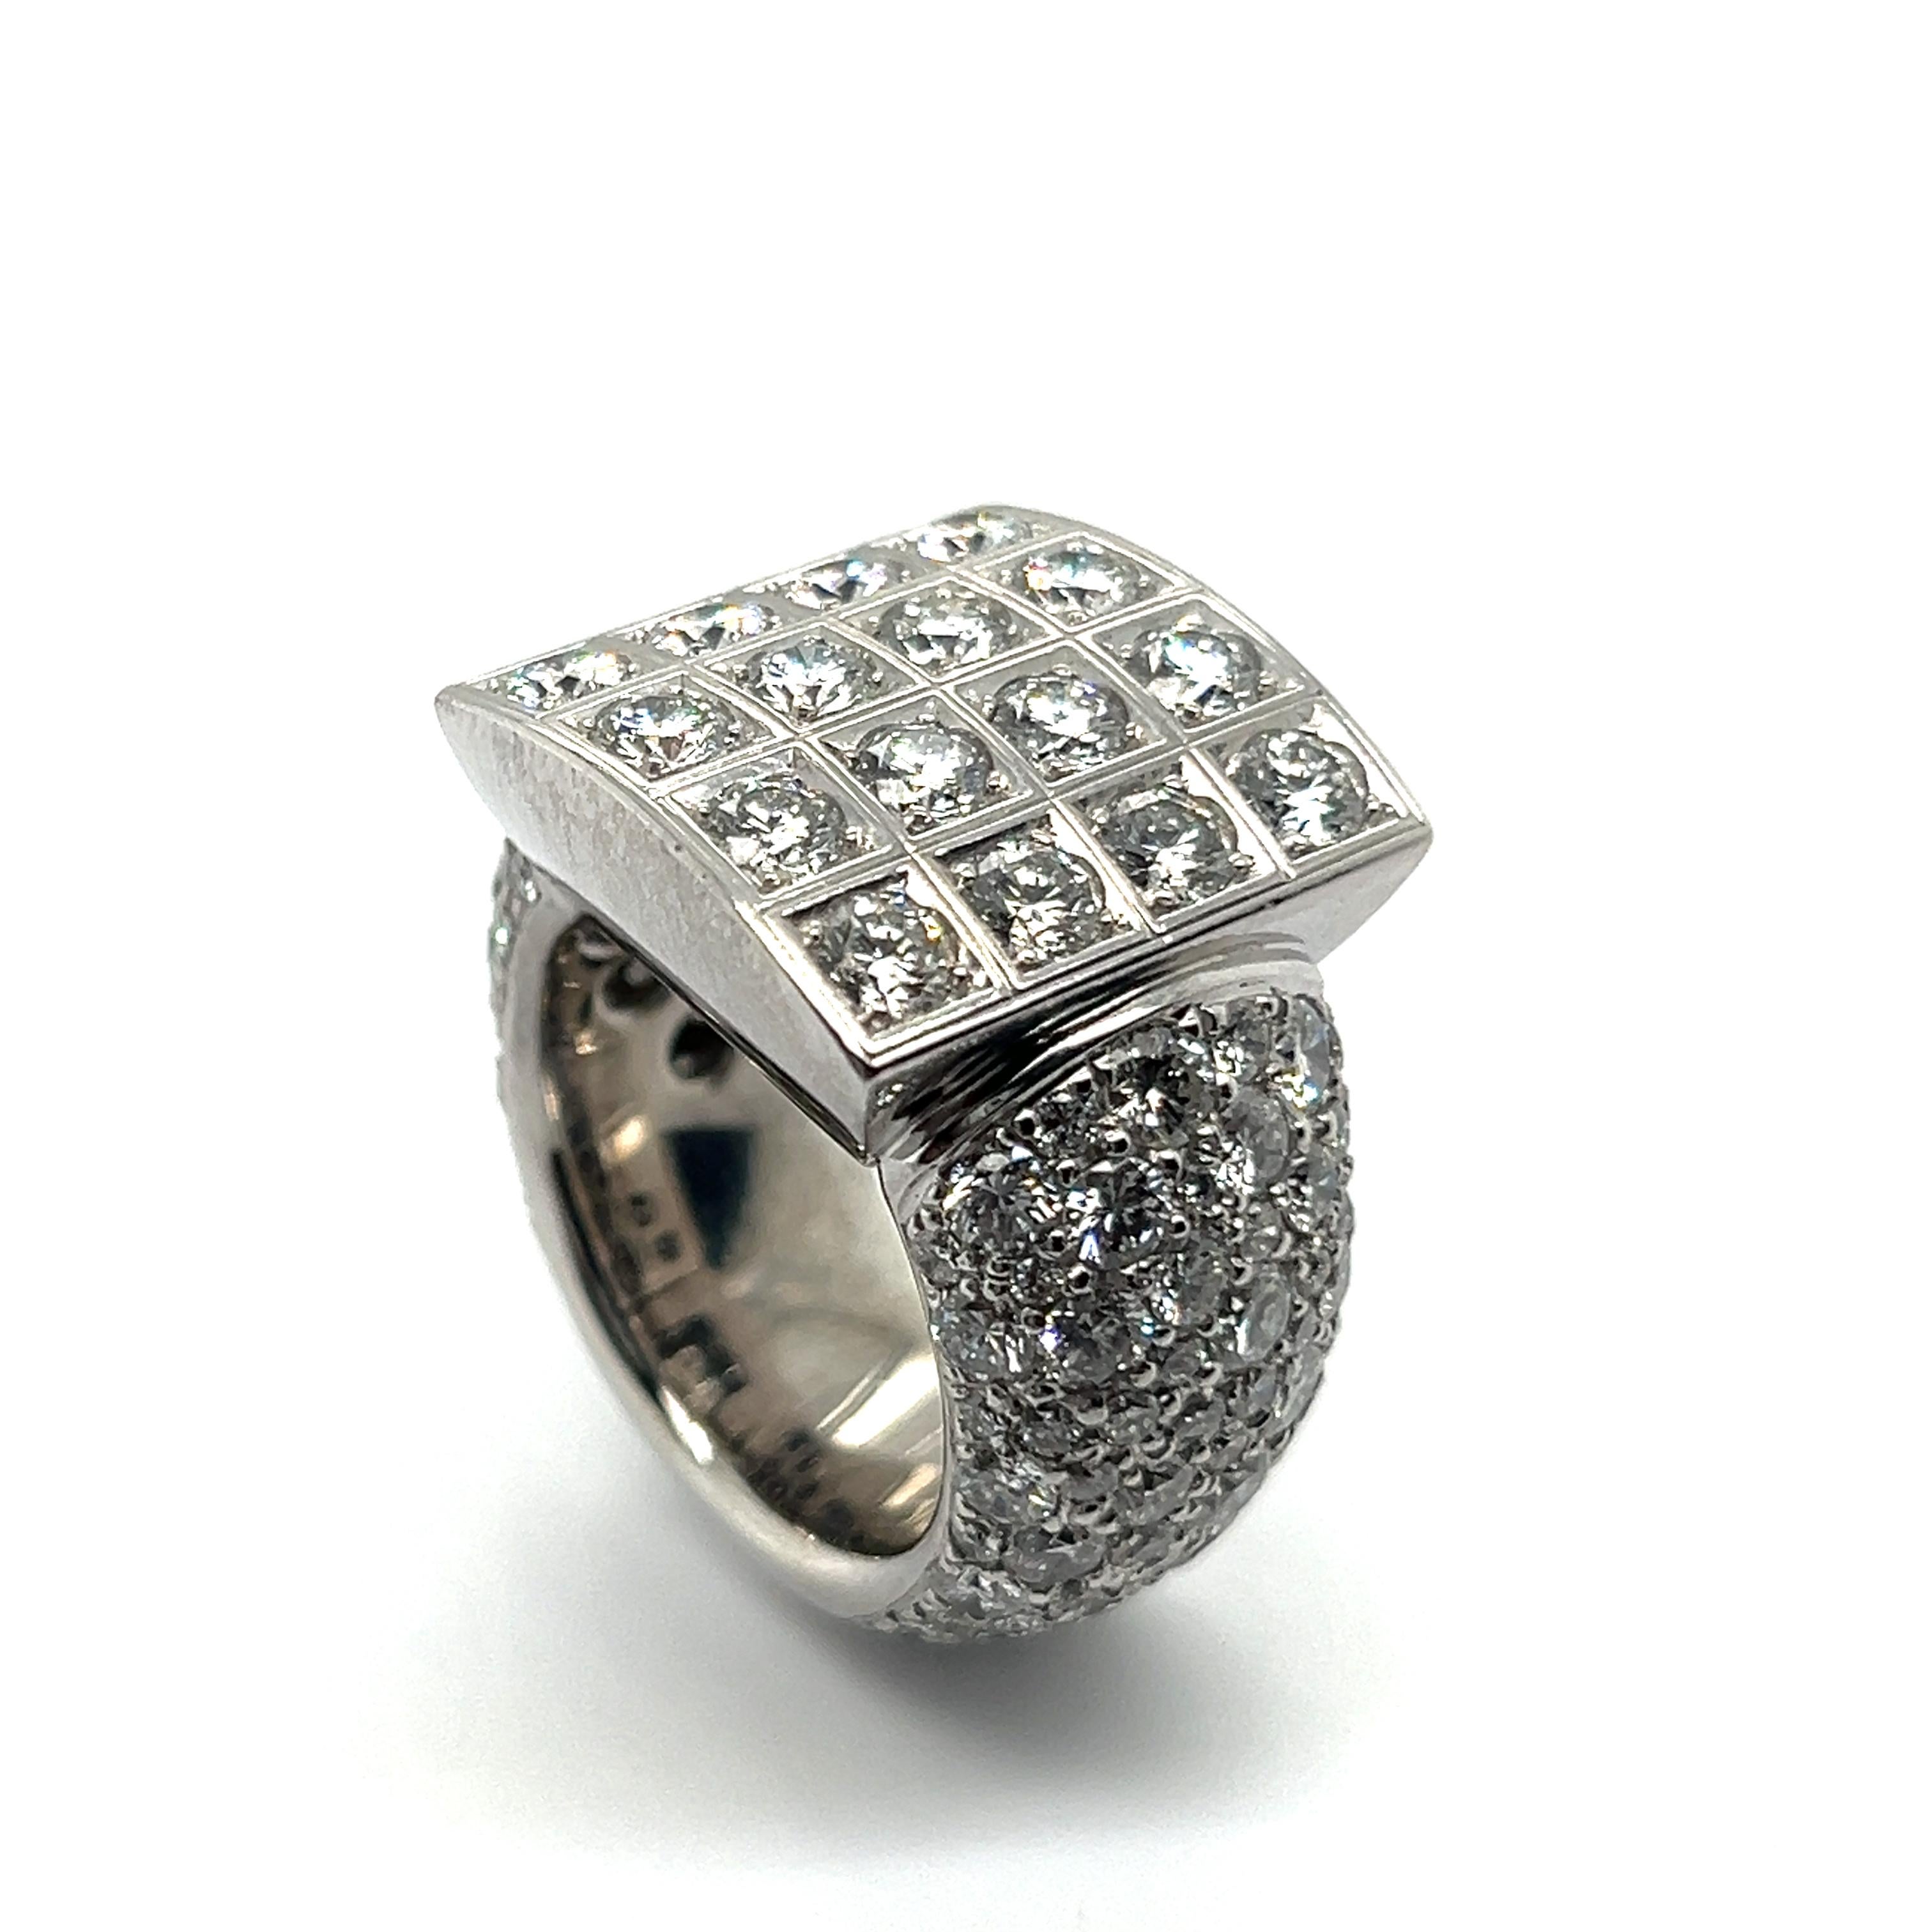 Bold Graphic Ring with Diamonds in 18 Karat White Gold by Majo Fruithof For Sale 5